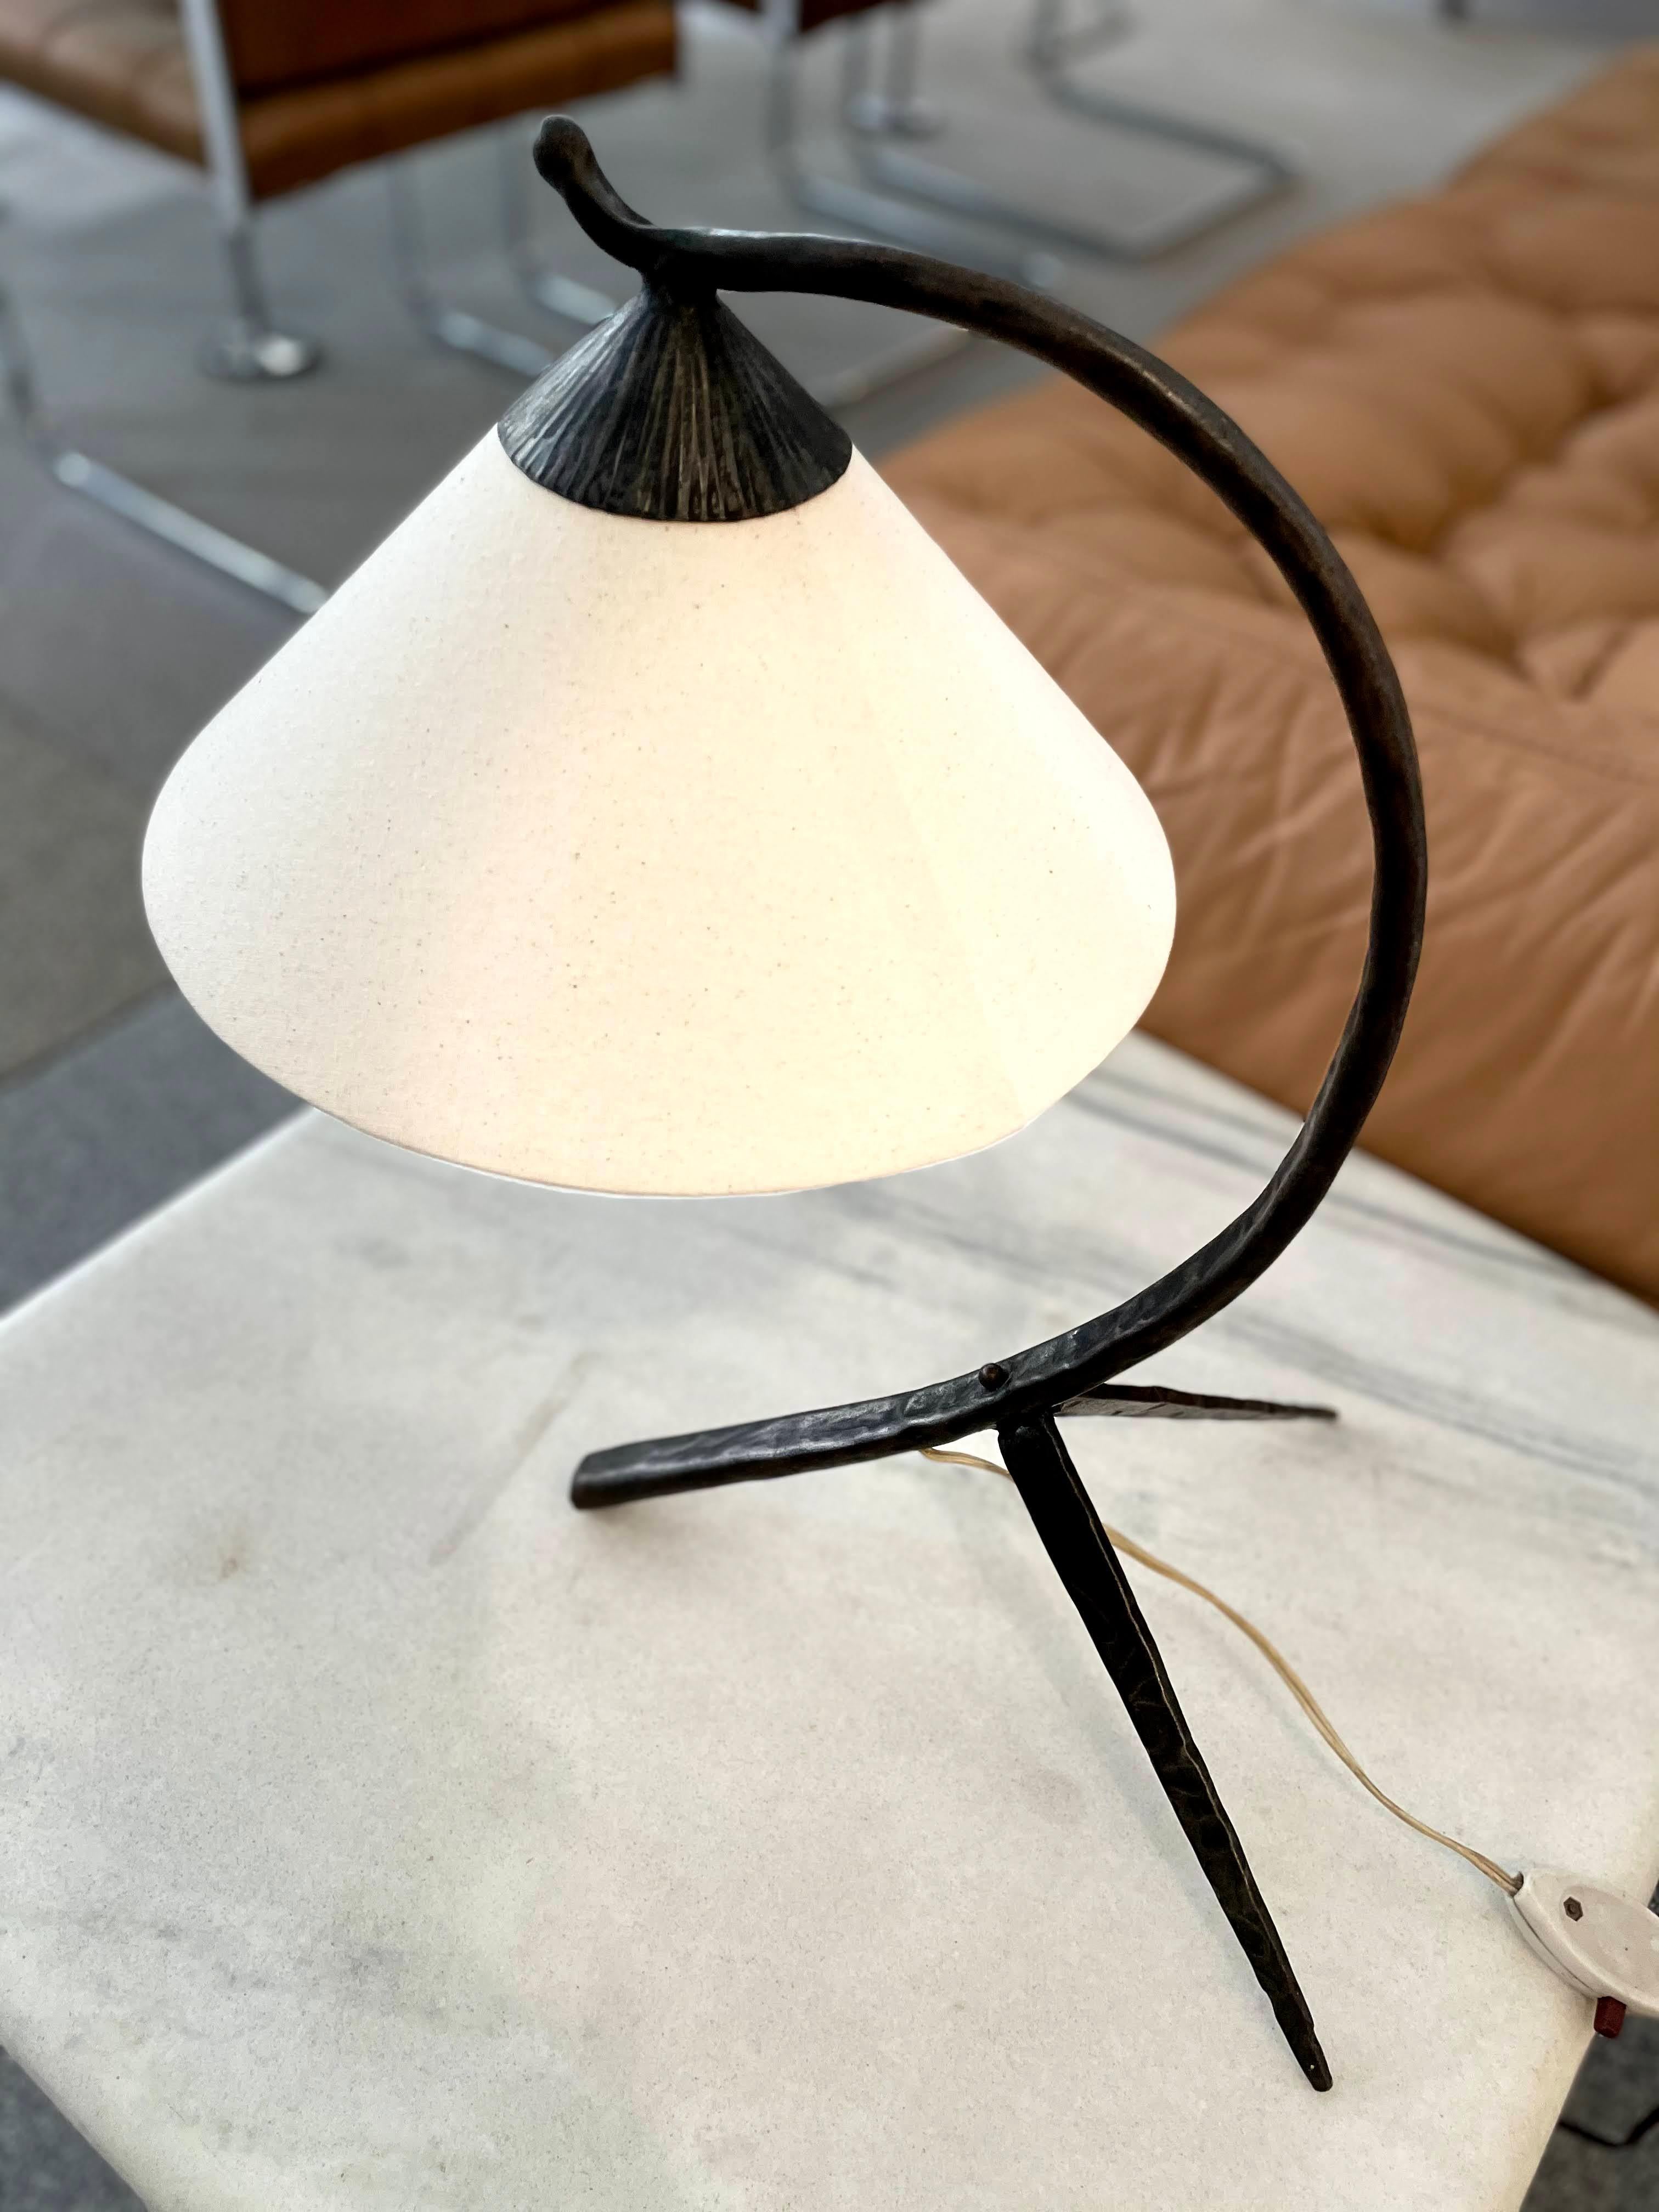 Unique vintage handcrafted table or desk lamp with V-shaped foot and new Chinese hat inspired shade.
Just a touch of patina on the base and one original E27 socket.
  